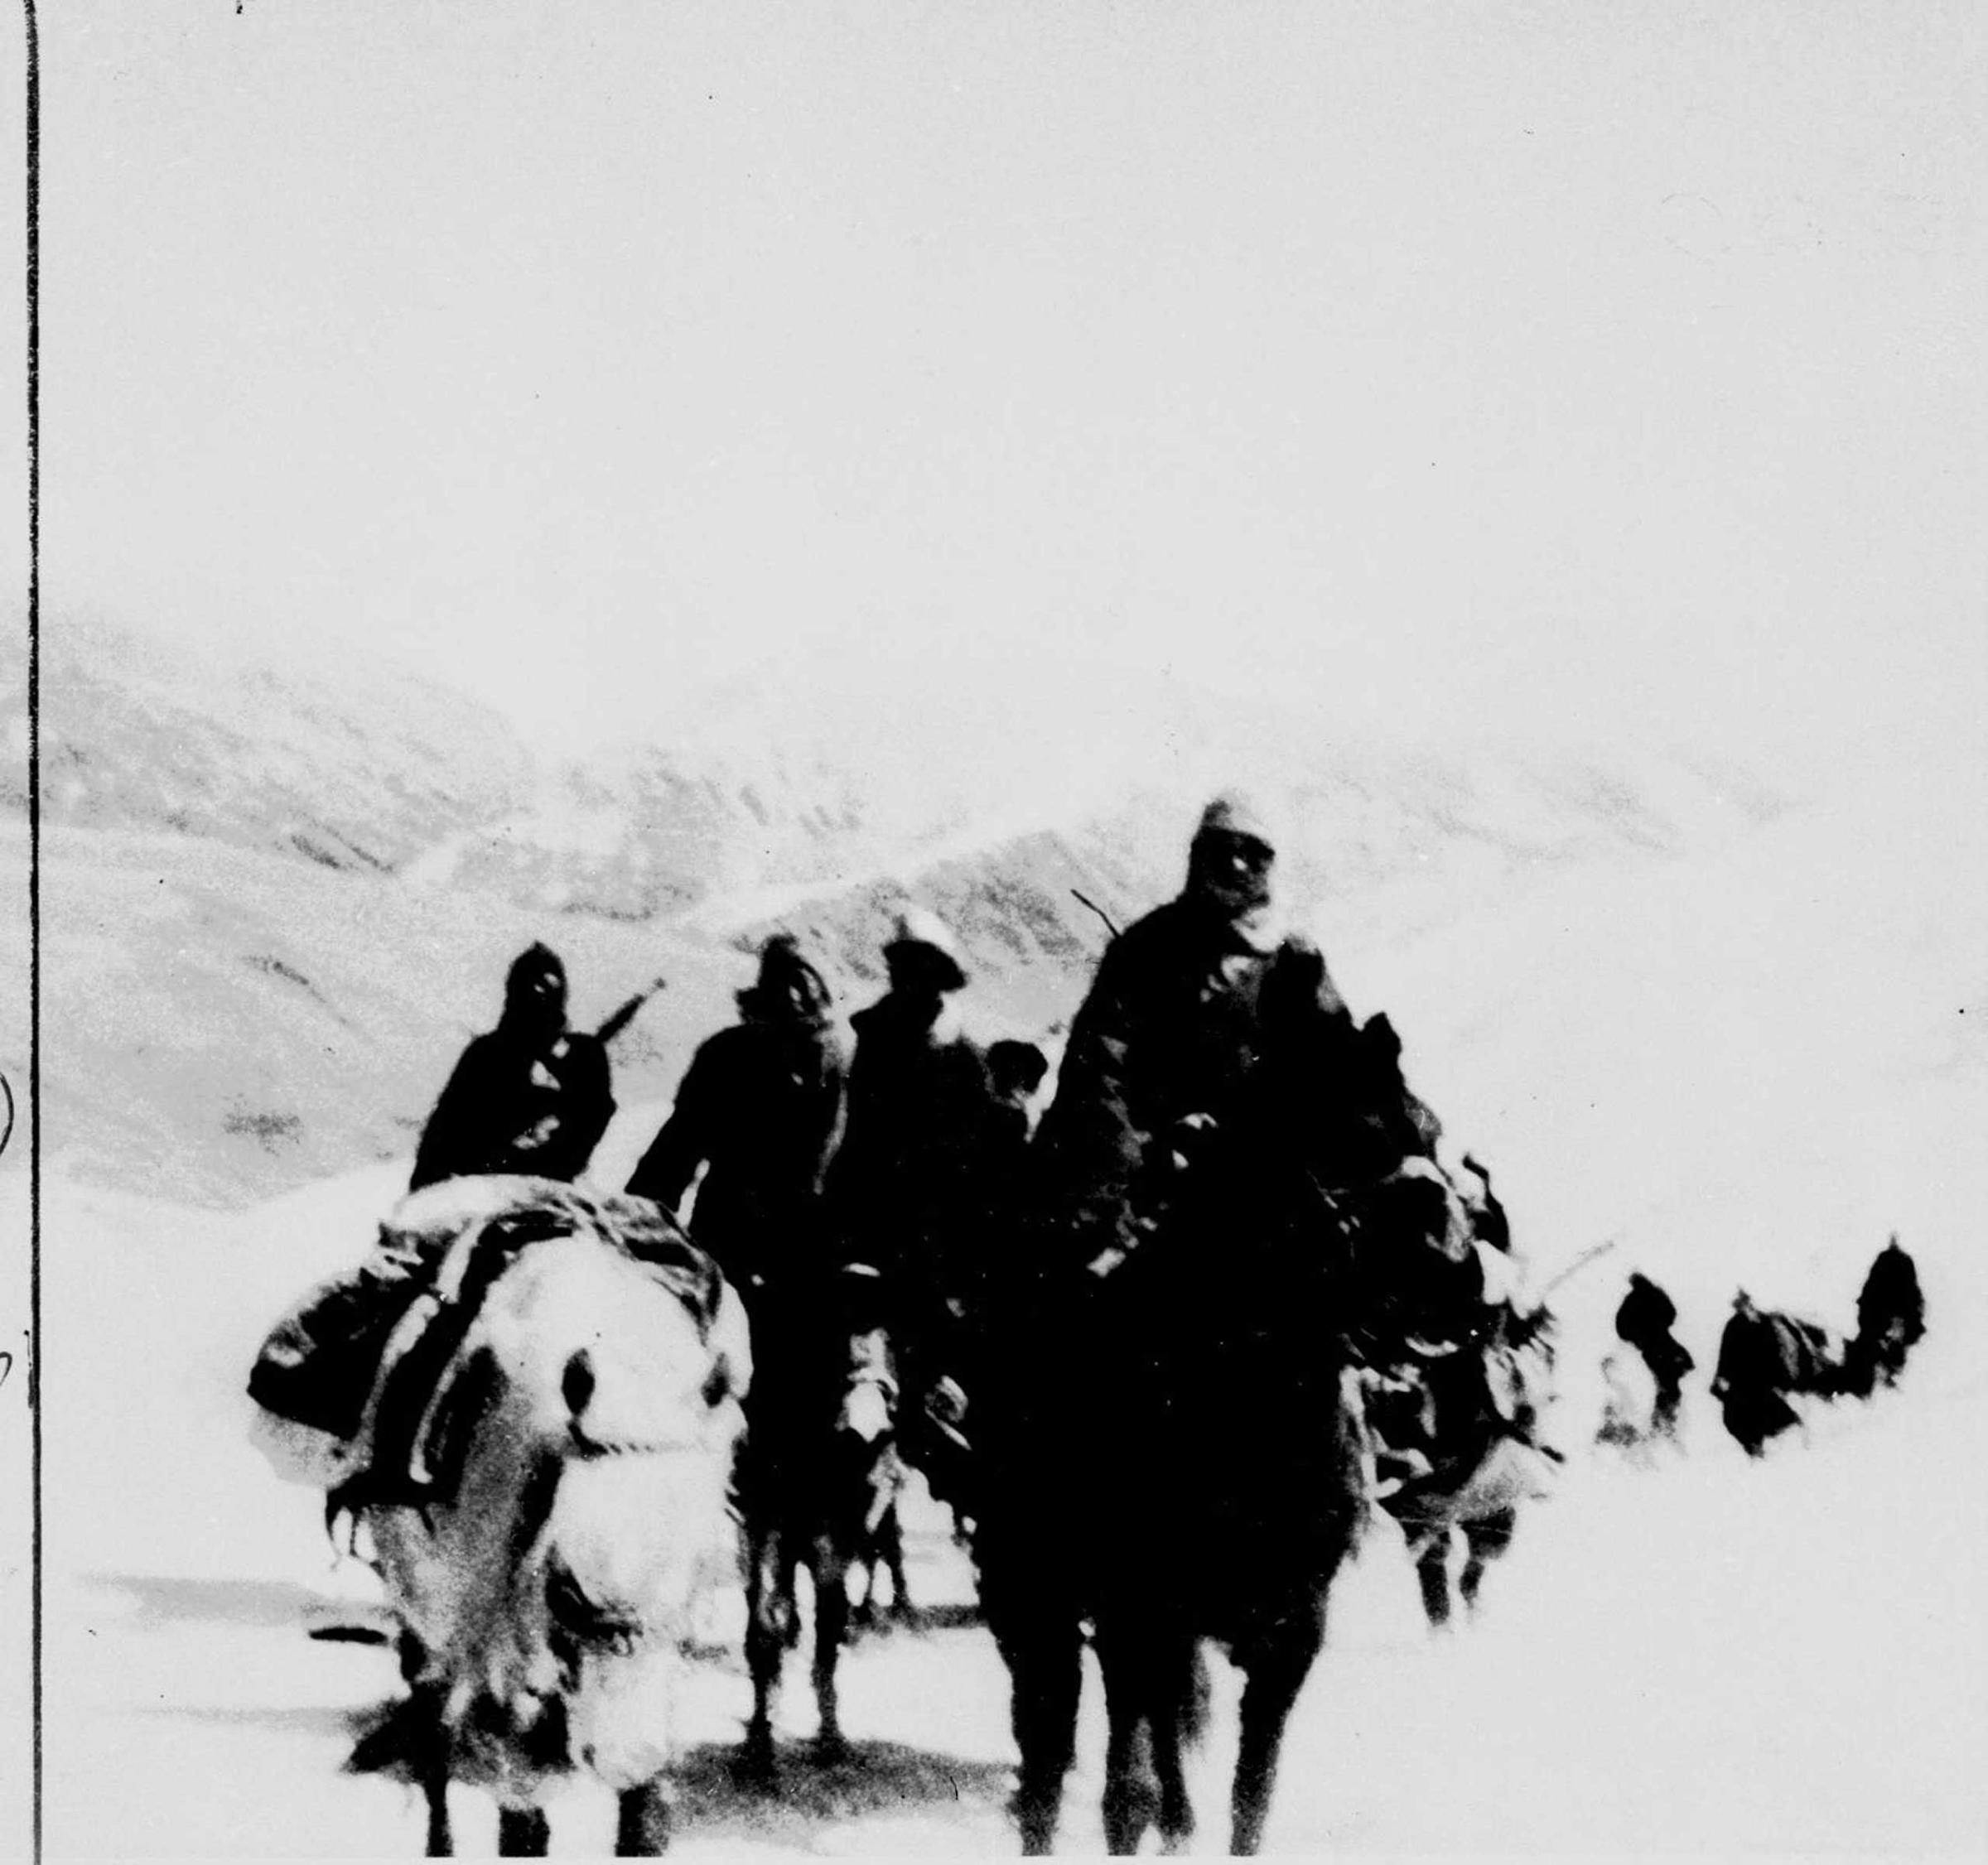 Averaging 12 miles a day through the Himalayas, the Dalai Lama is shown journeying through the Karpo Pass, one of the highest on the flight route of the 23-year-old ruler from Lhasa. His flight began March 17, 1959. Here the escape party is seen on March 28, three days before reaching sanctuary in the free zone of India.